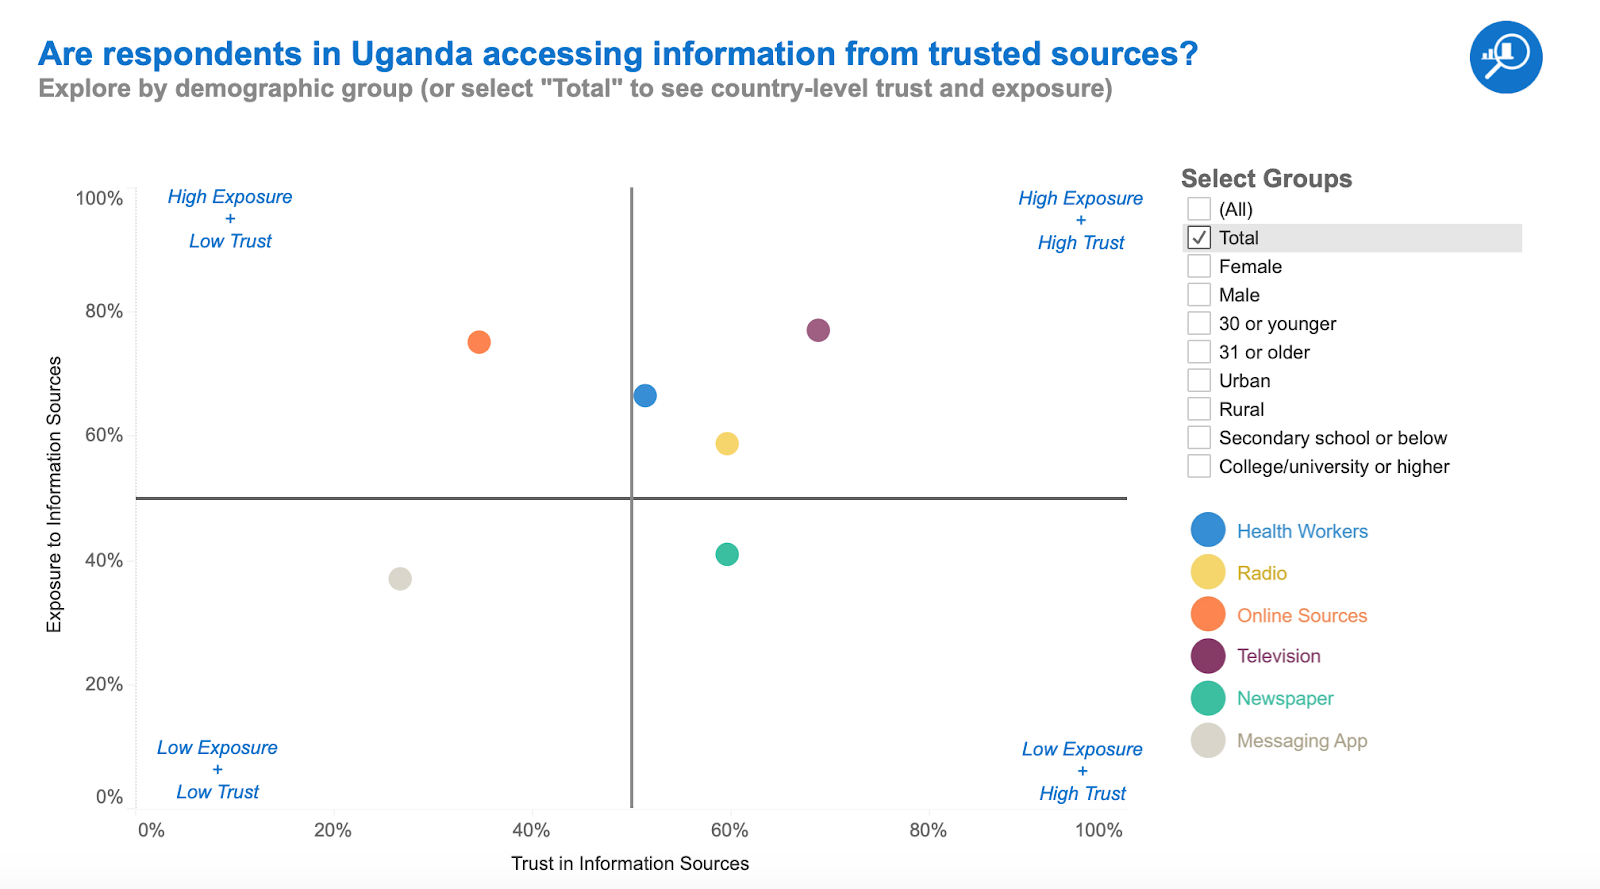 Are respondents in Uganda accessing information from trusted sources?